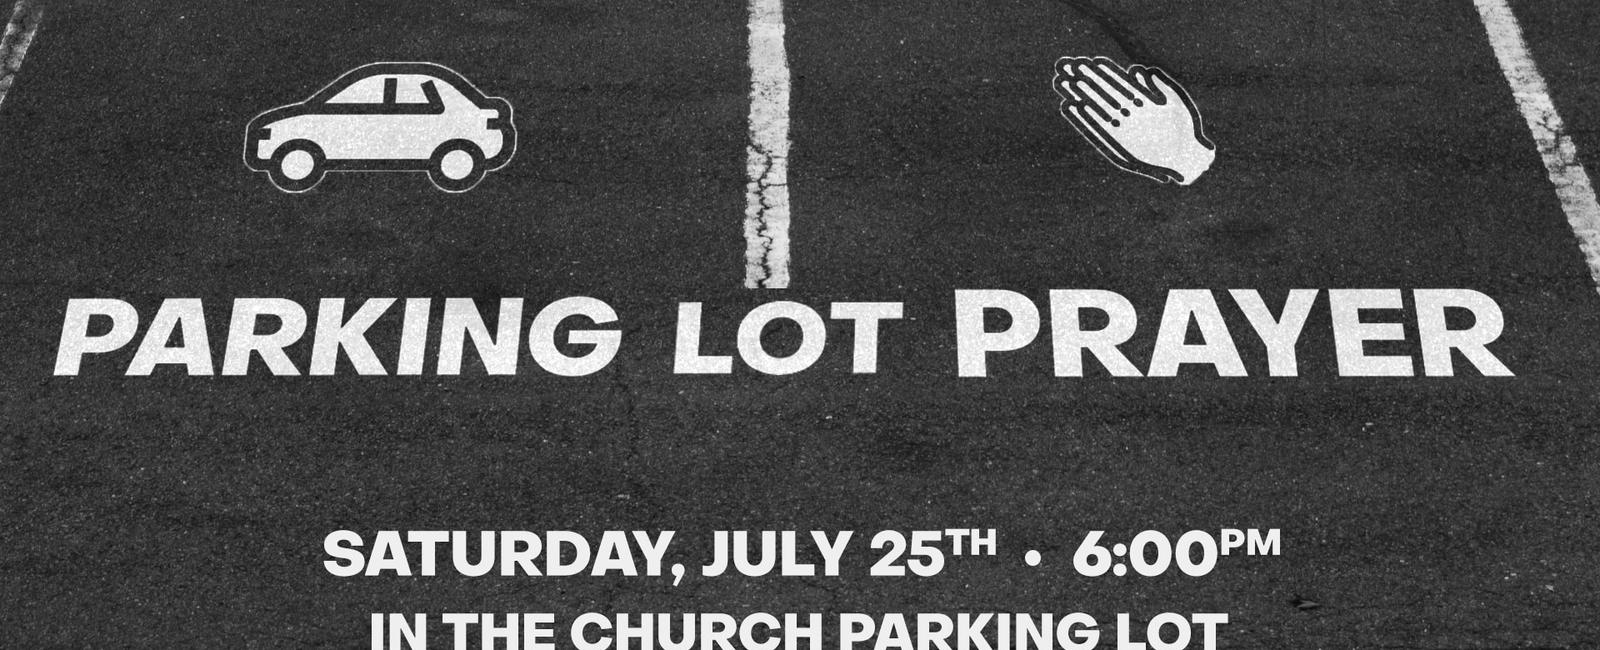 7 of religious americans pray to god about finding a good parking spot